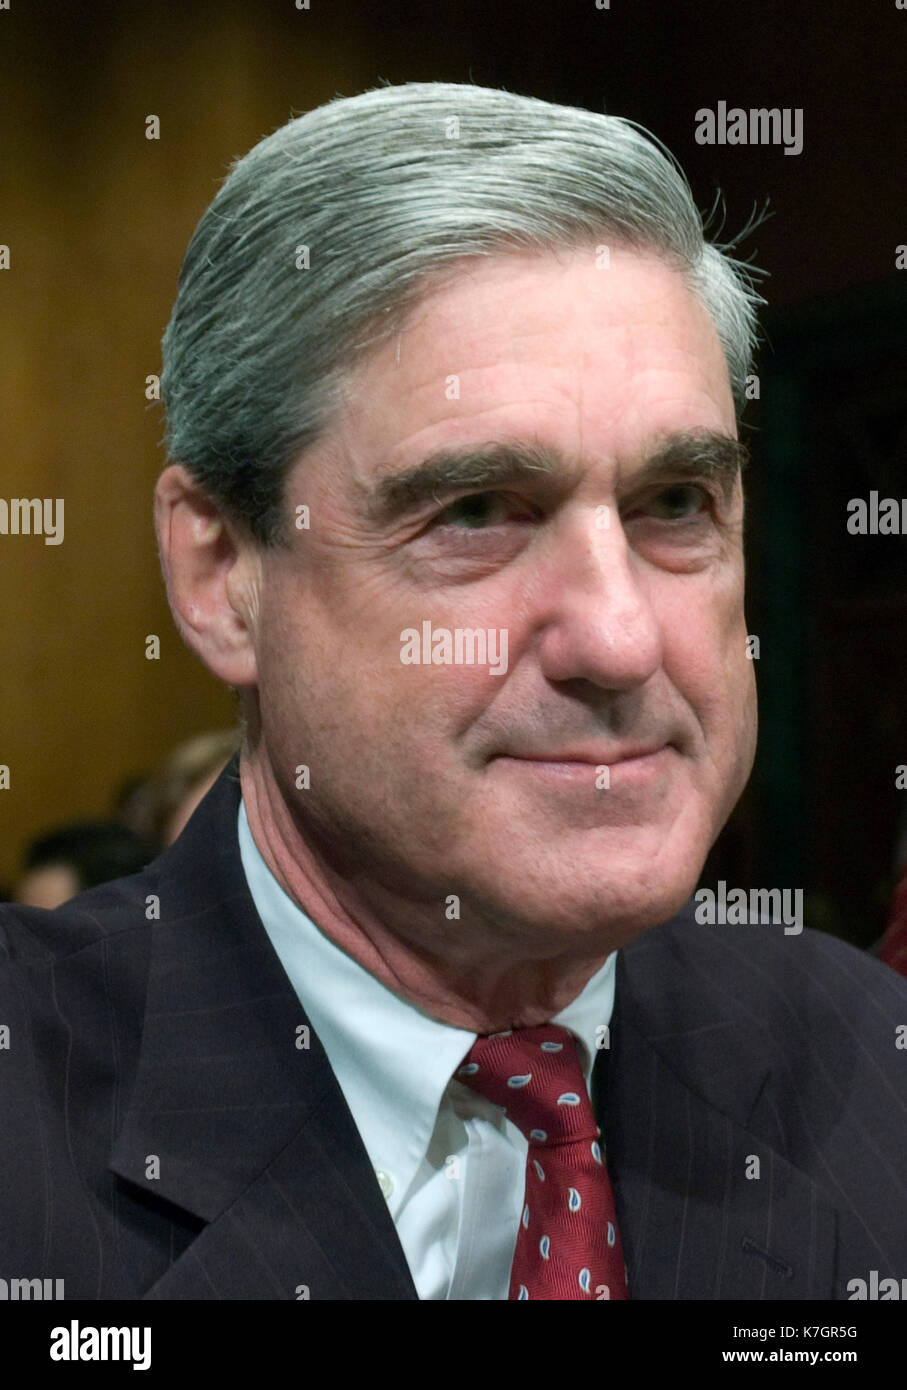 FBI Director Robert Mueller makes an appearance before the Senate Judicary Committe to discusss recent activiites involving FBI agents, Washington D.C., March 5, 2008. Credit: Patsy Lynch/MediaPunch Stock Photo